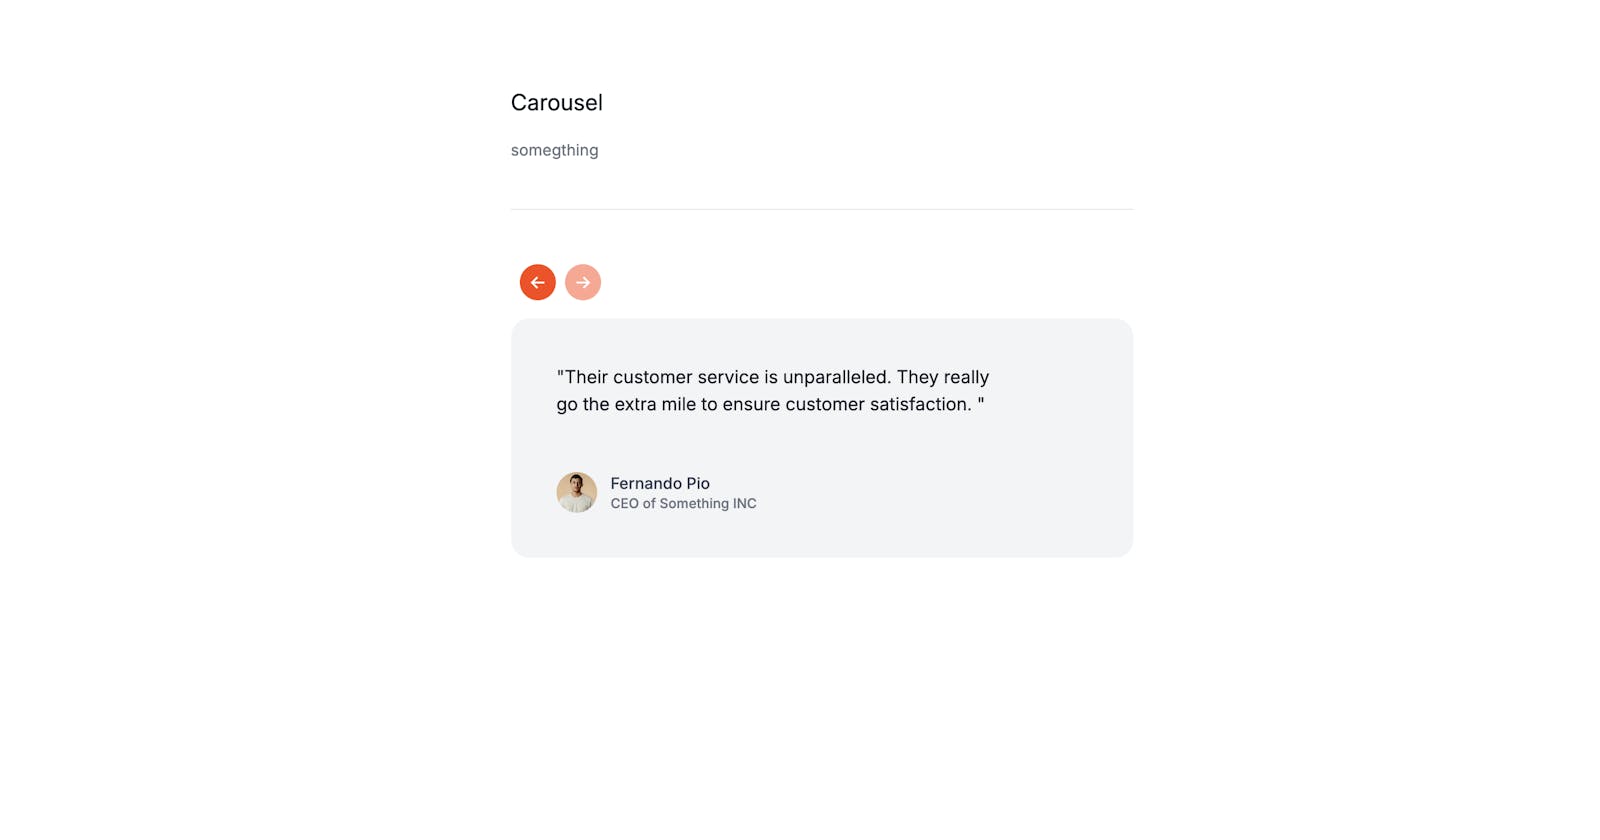 How to create a carousel with Tailwind CSS and Alpinejs